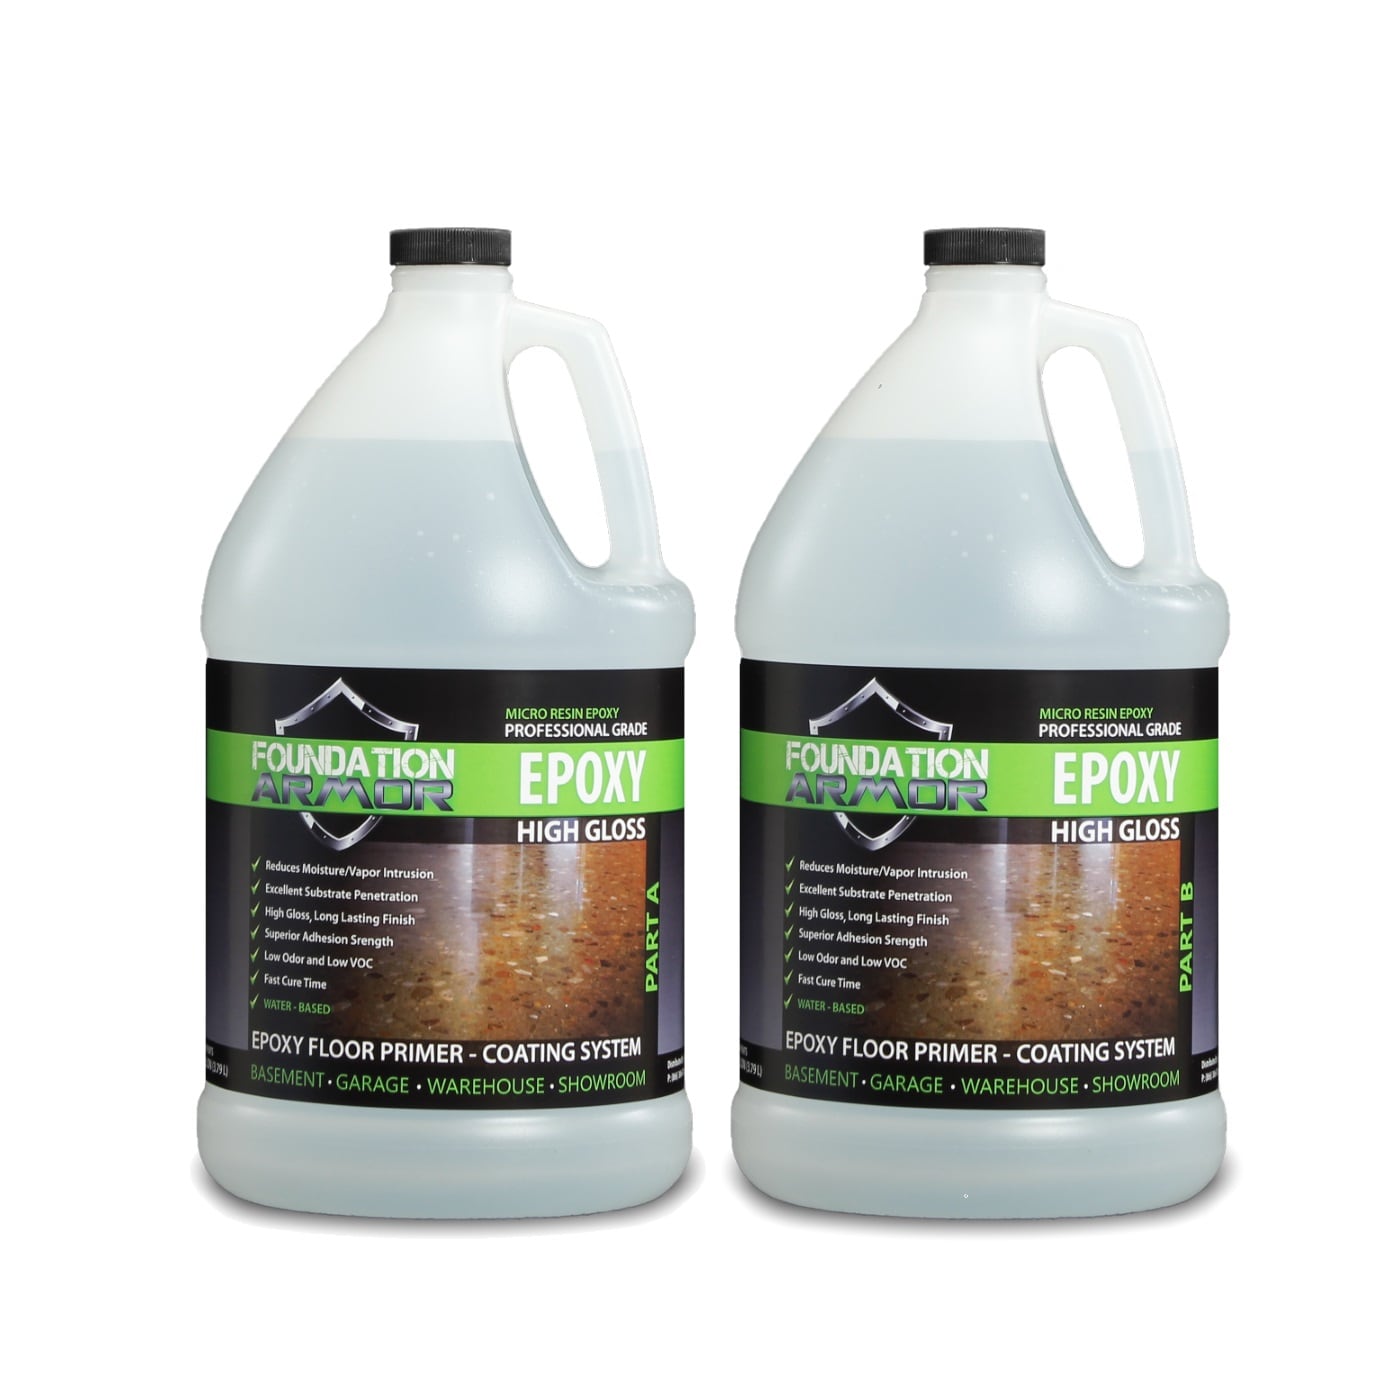 MAX CLR HP 1.5 GALLON - EPOXY RESIN HIGH PERFORMANCE CLEAR COATING